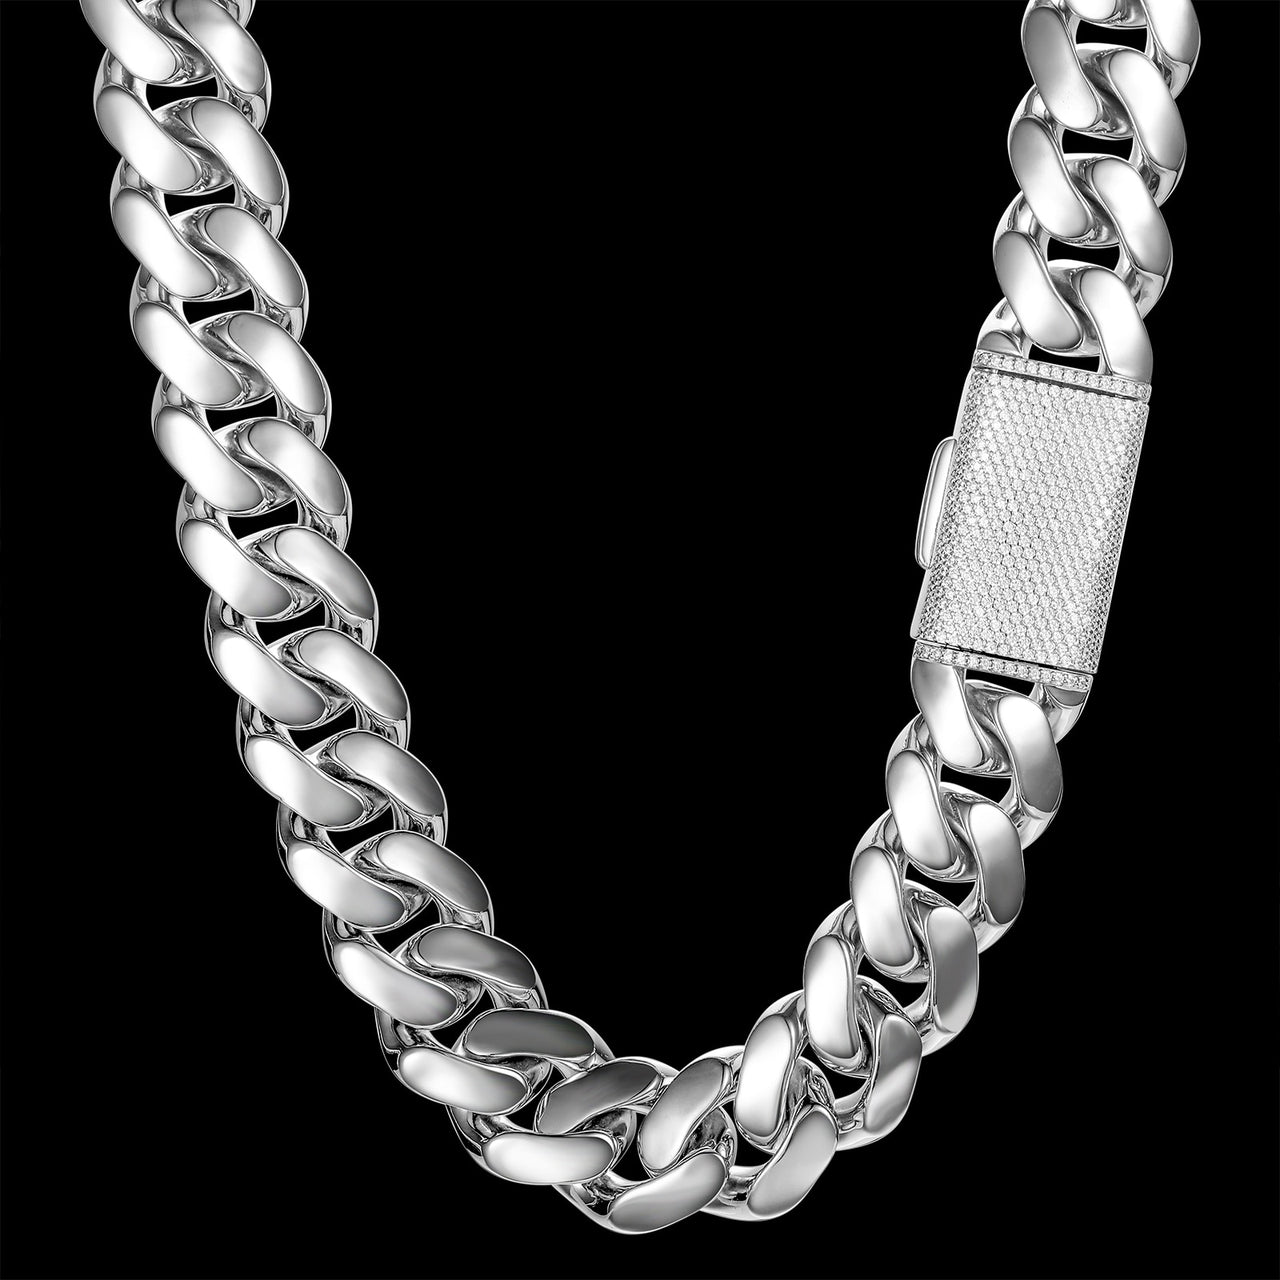 20mm Solid 18k Miami Cuban Link Chain w/Iced Clasp - Different Drips